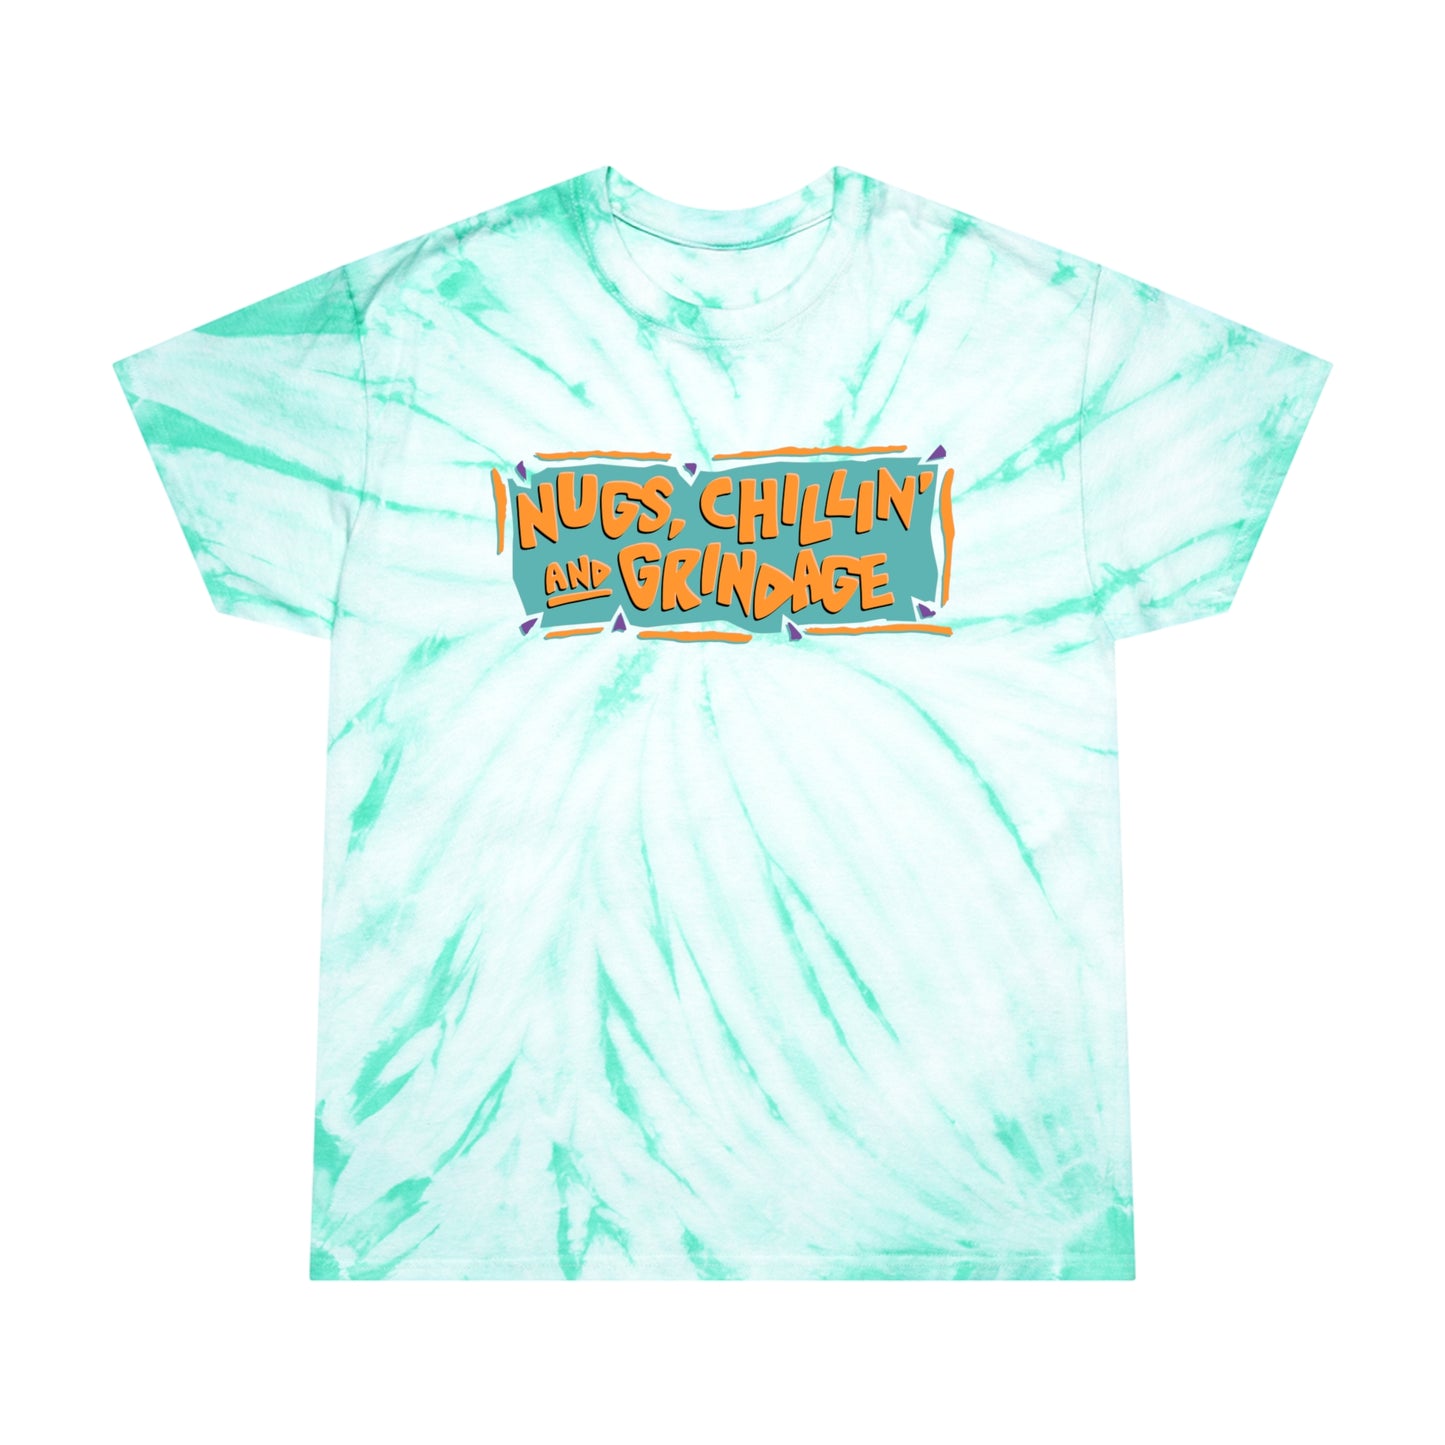 Nugs Chillin and Grindage tie-dye t-shirt